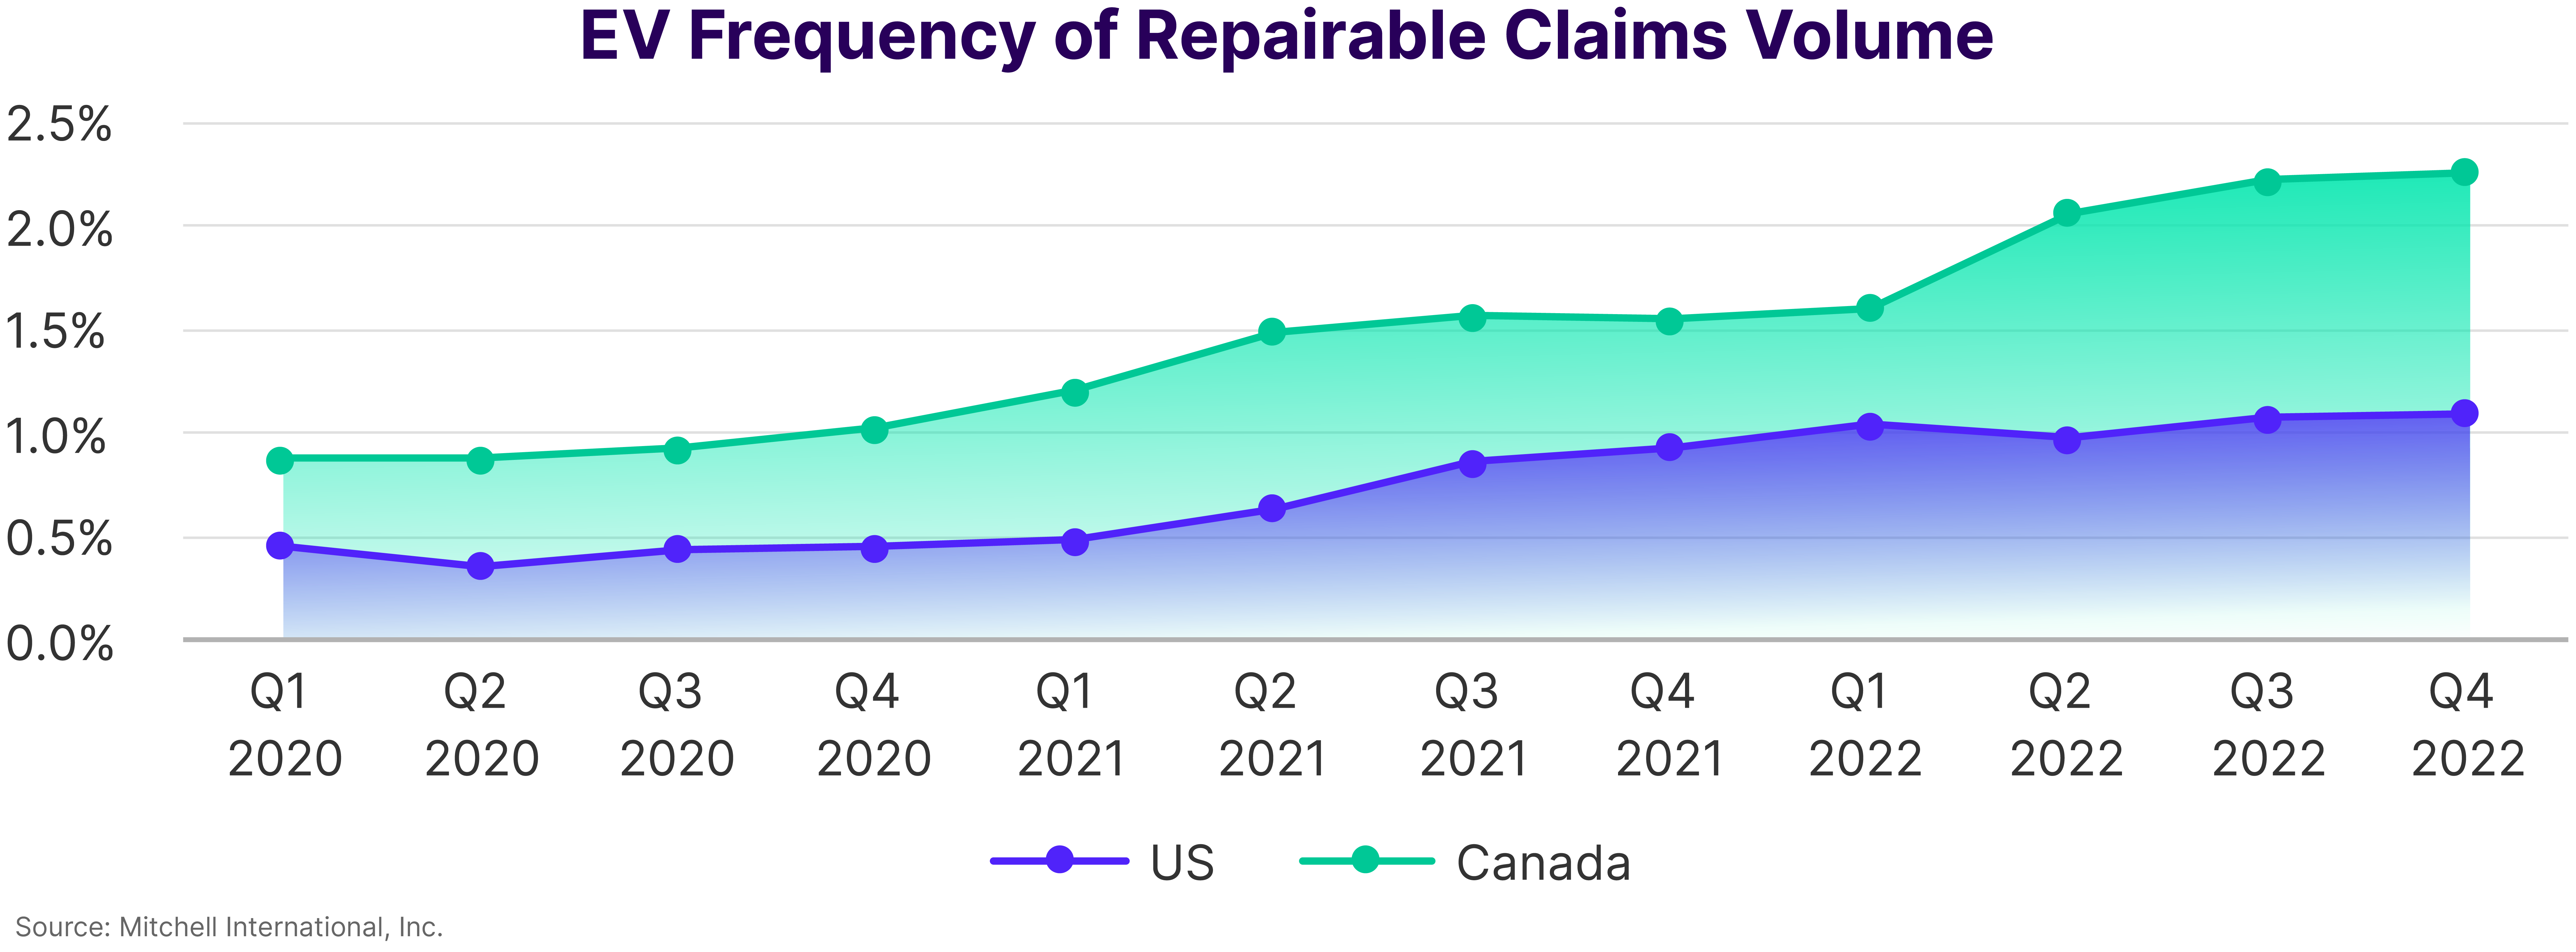 EV Frequency of Repairable Claims Volume